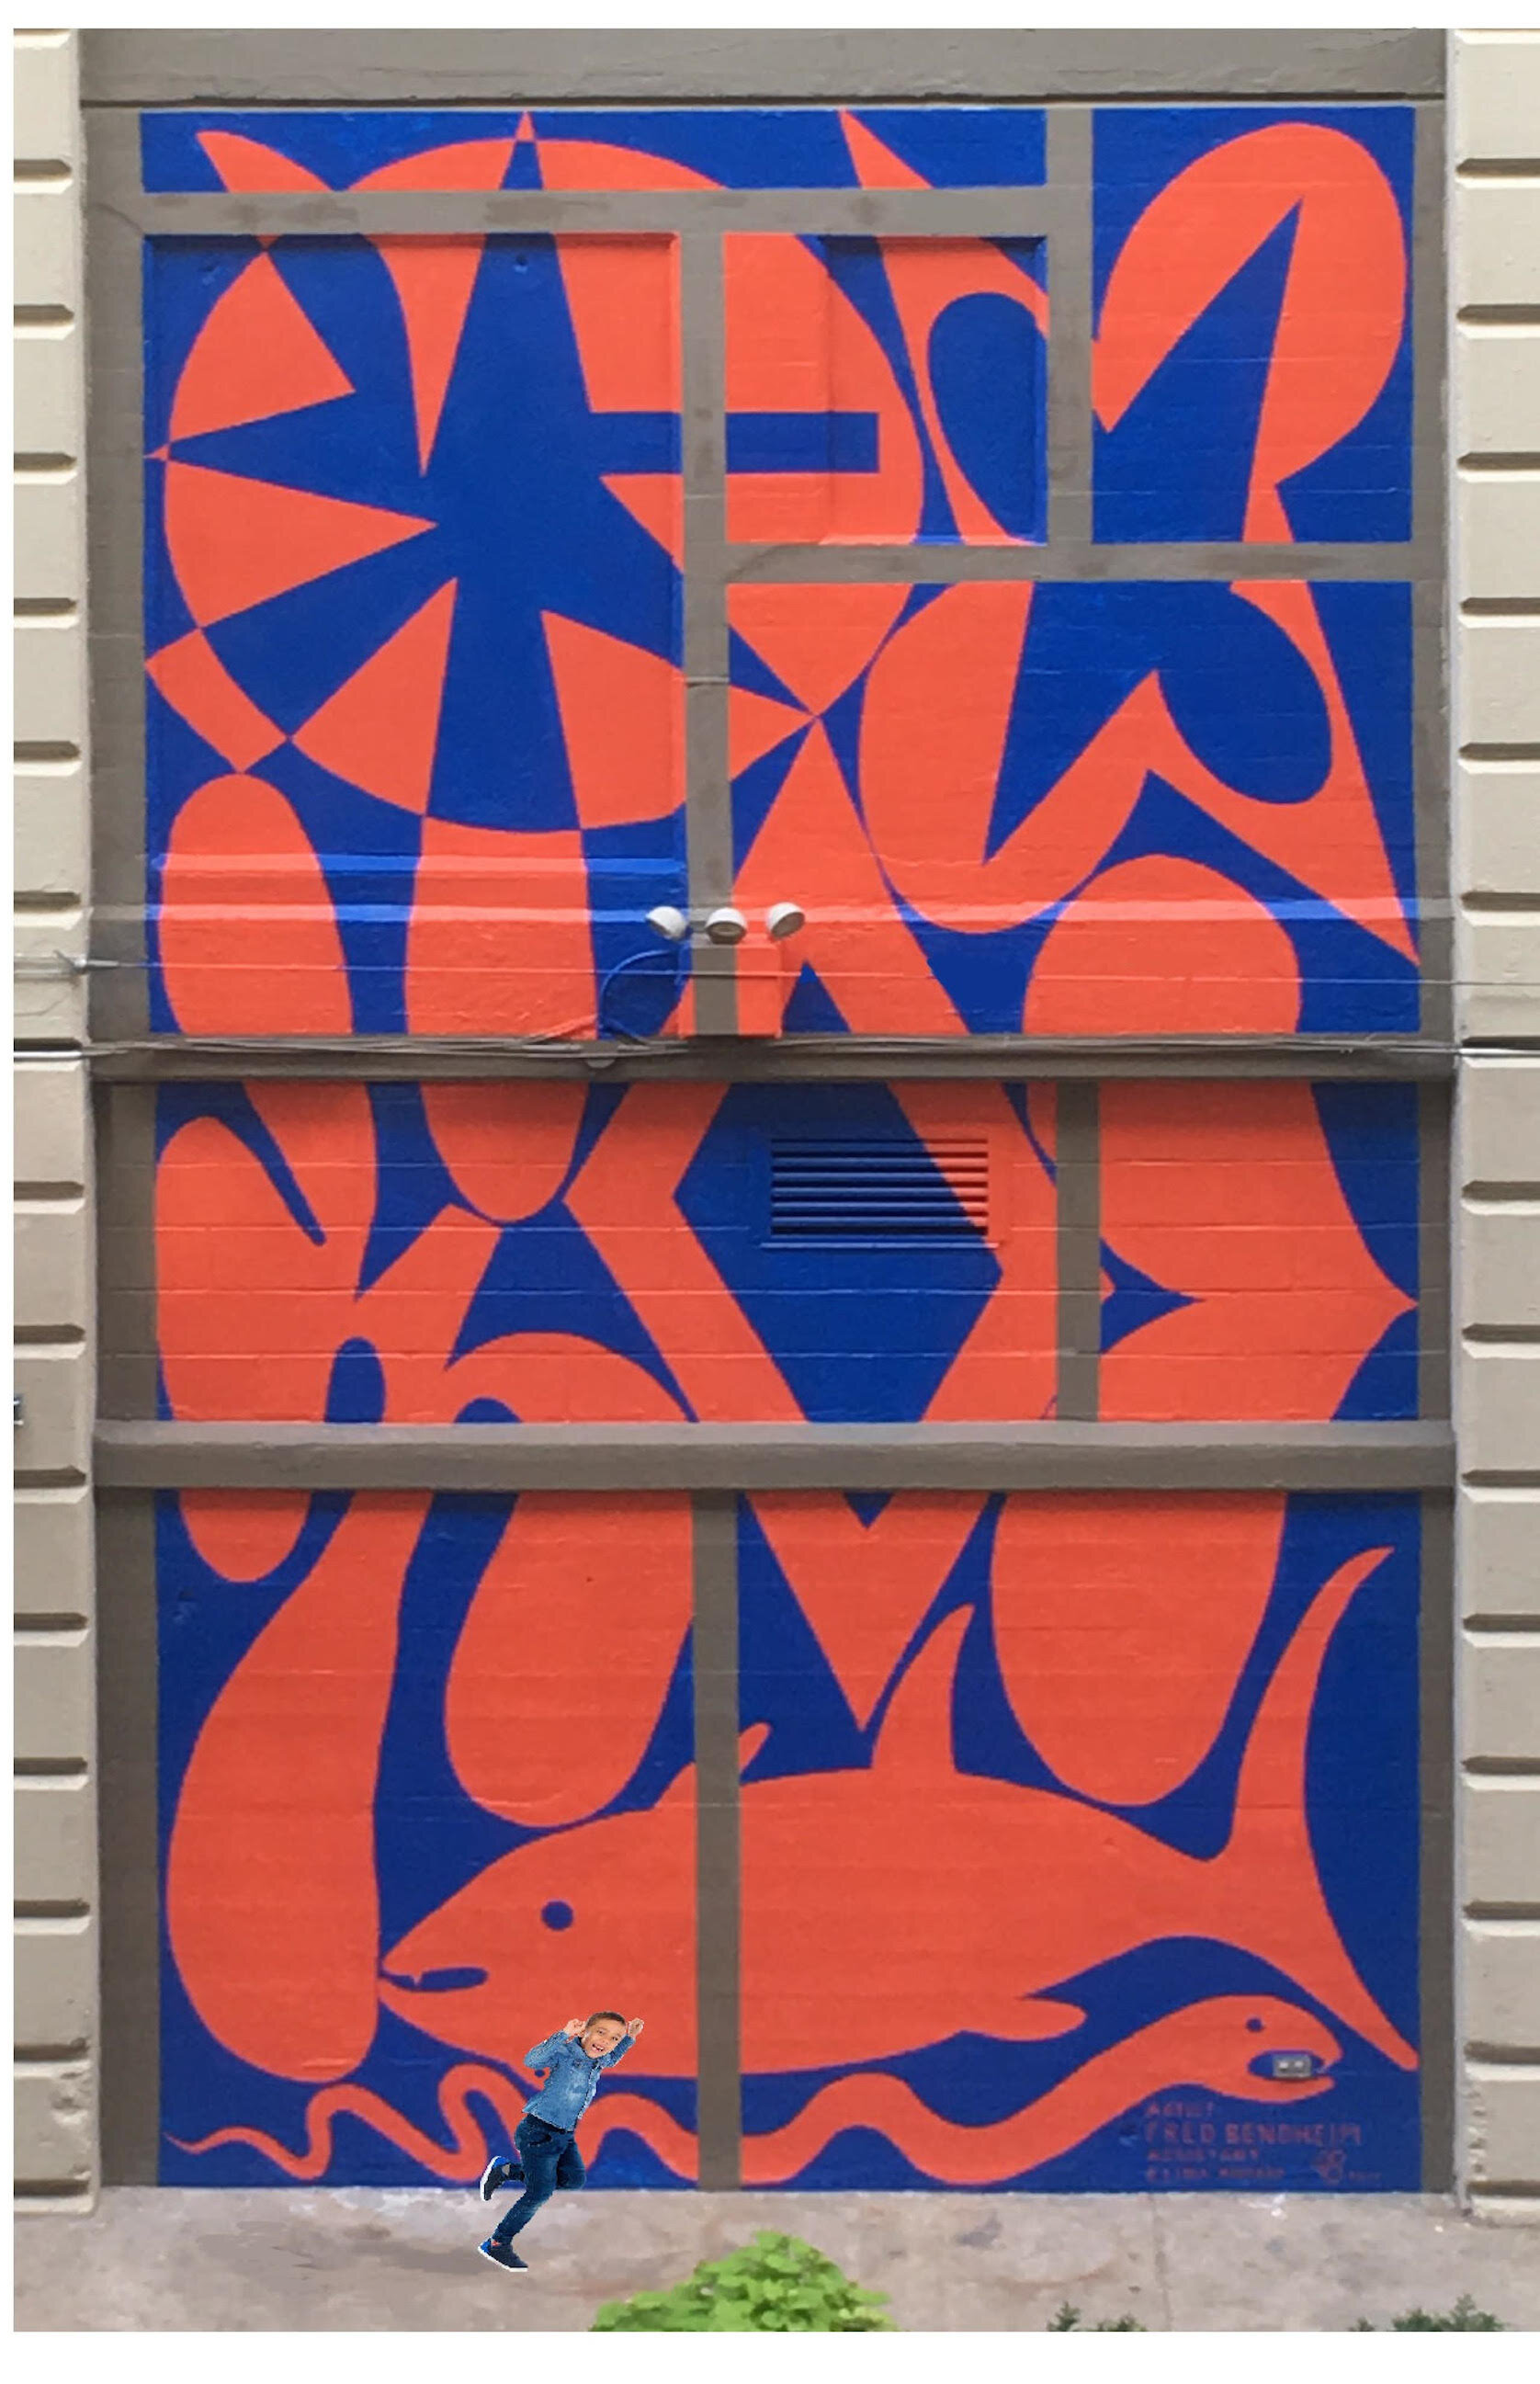 Evolution, north wall, 25 ft. x 14ft., 2019